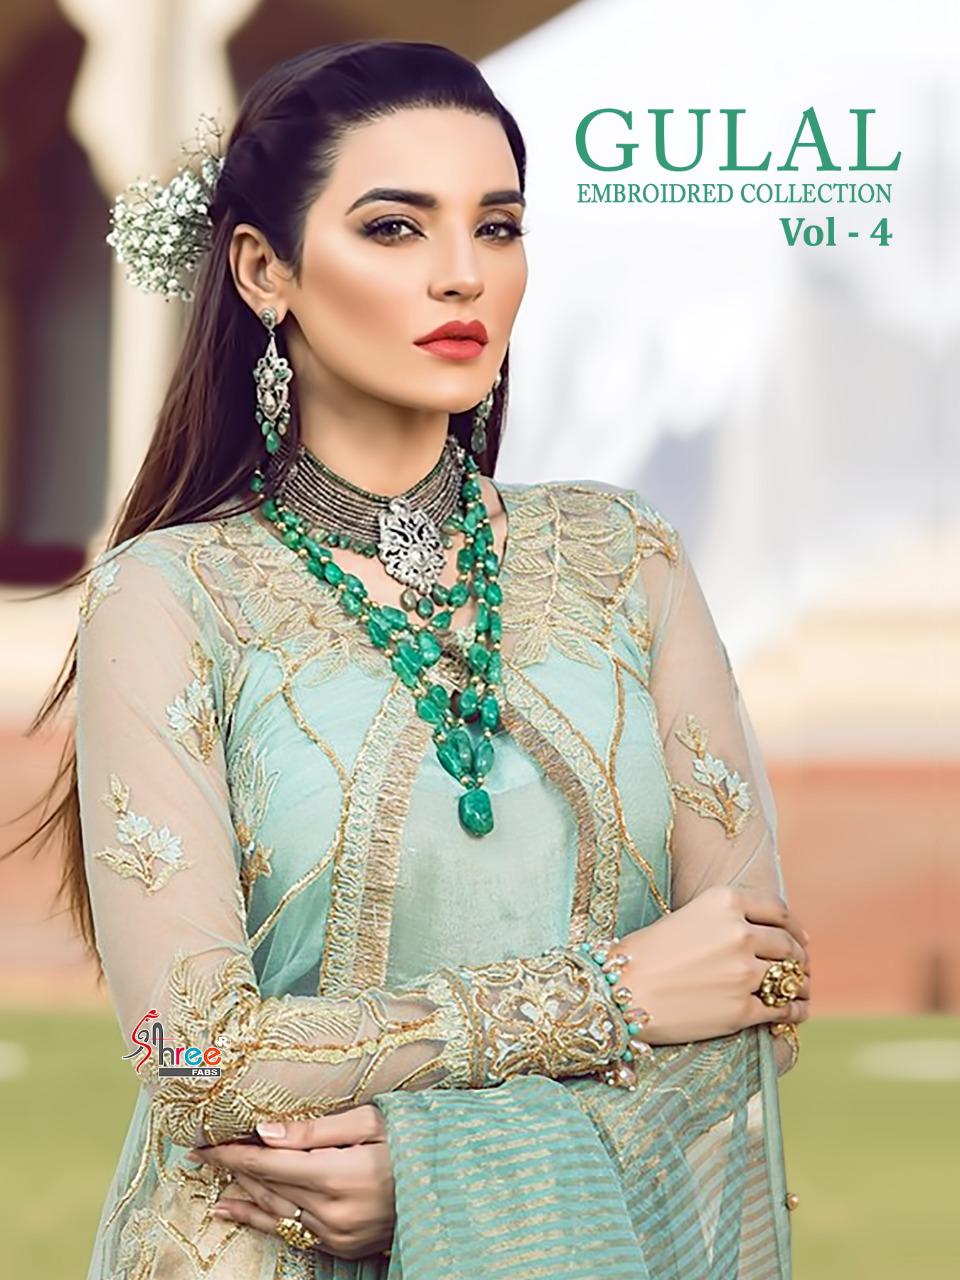 Shree Fabs Gulal Embroidered Collection Vol 4 Heavy Net Geor...